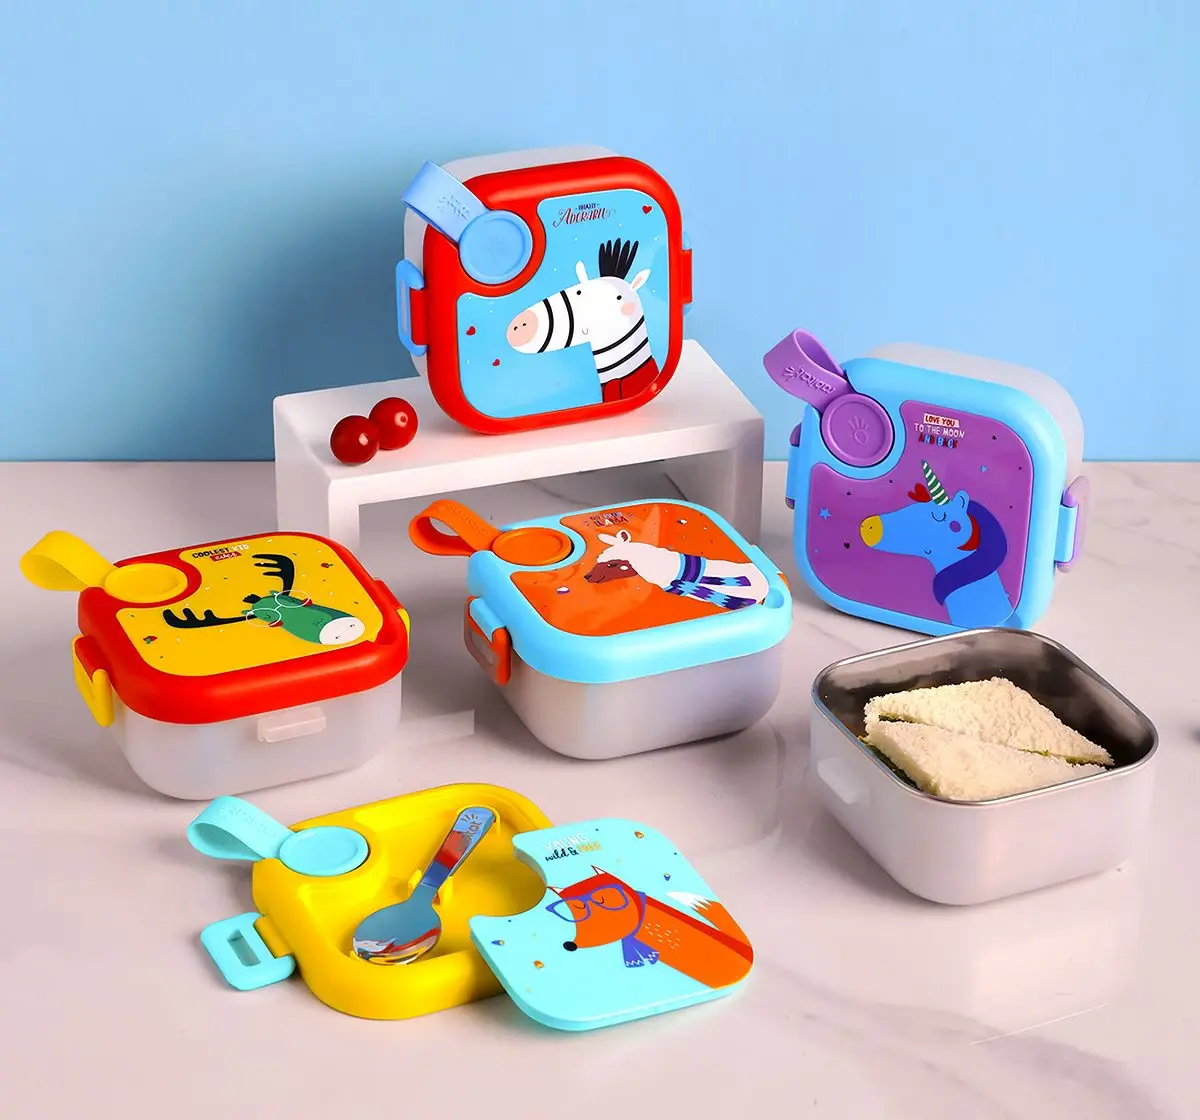 Rabitat Lunchmate Mini Stainless Steel Lunch Box with Spoon Little Boss 500 ml For Kids of Age 3Y+, Multicolour